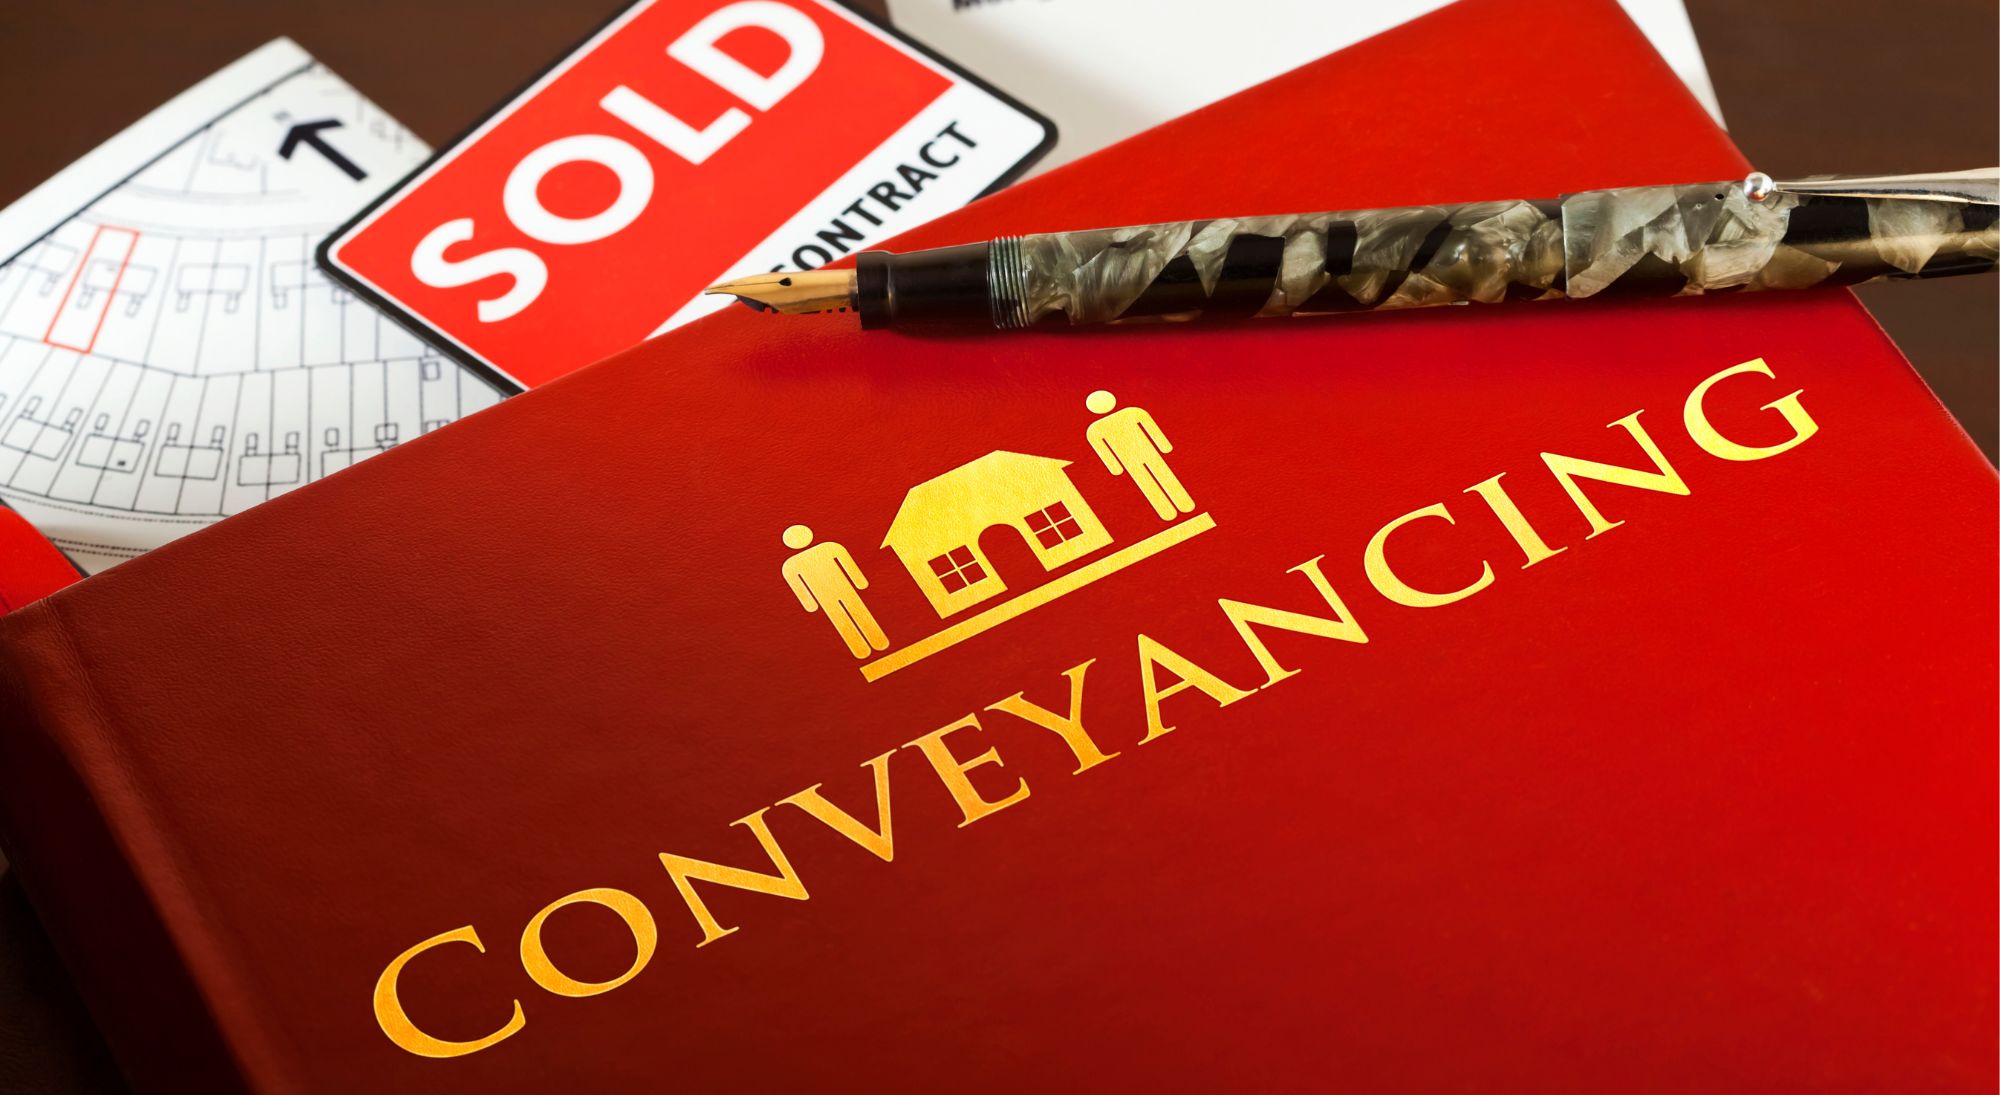 Classic Conveyancing Company